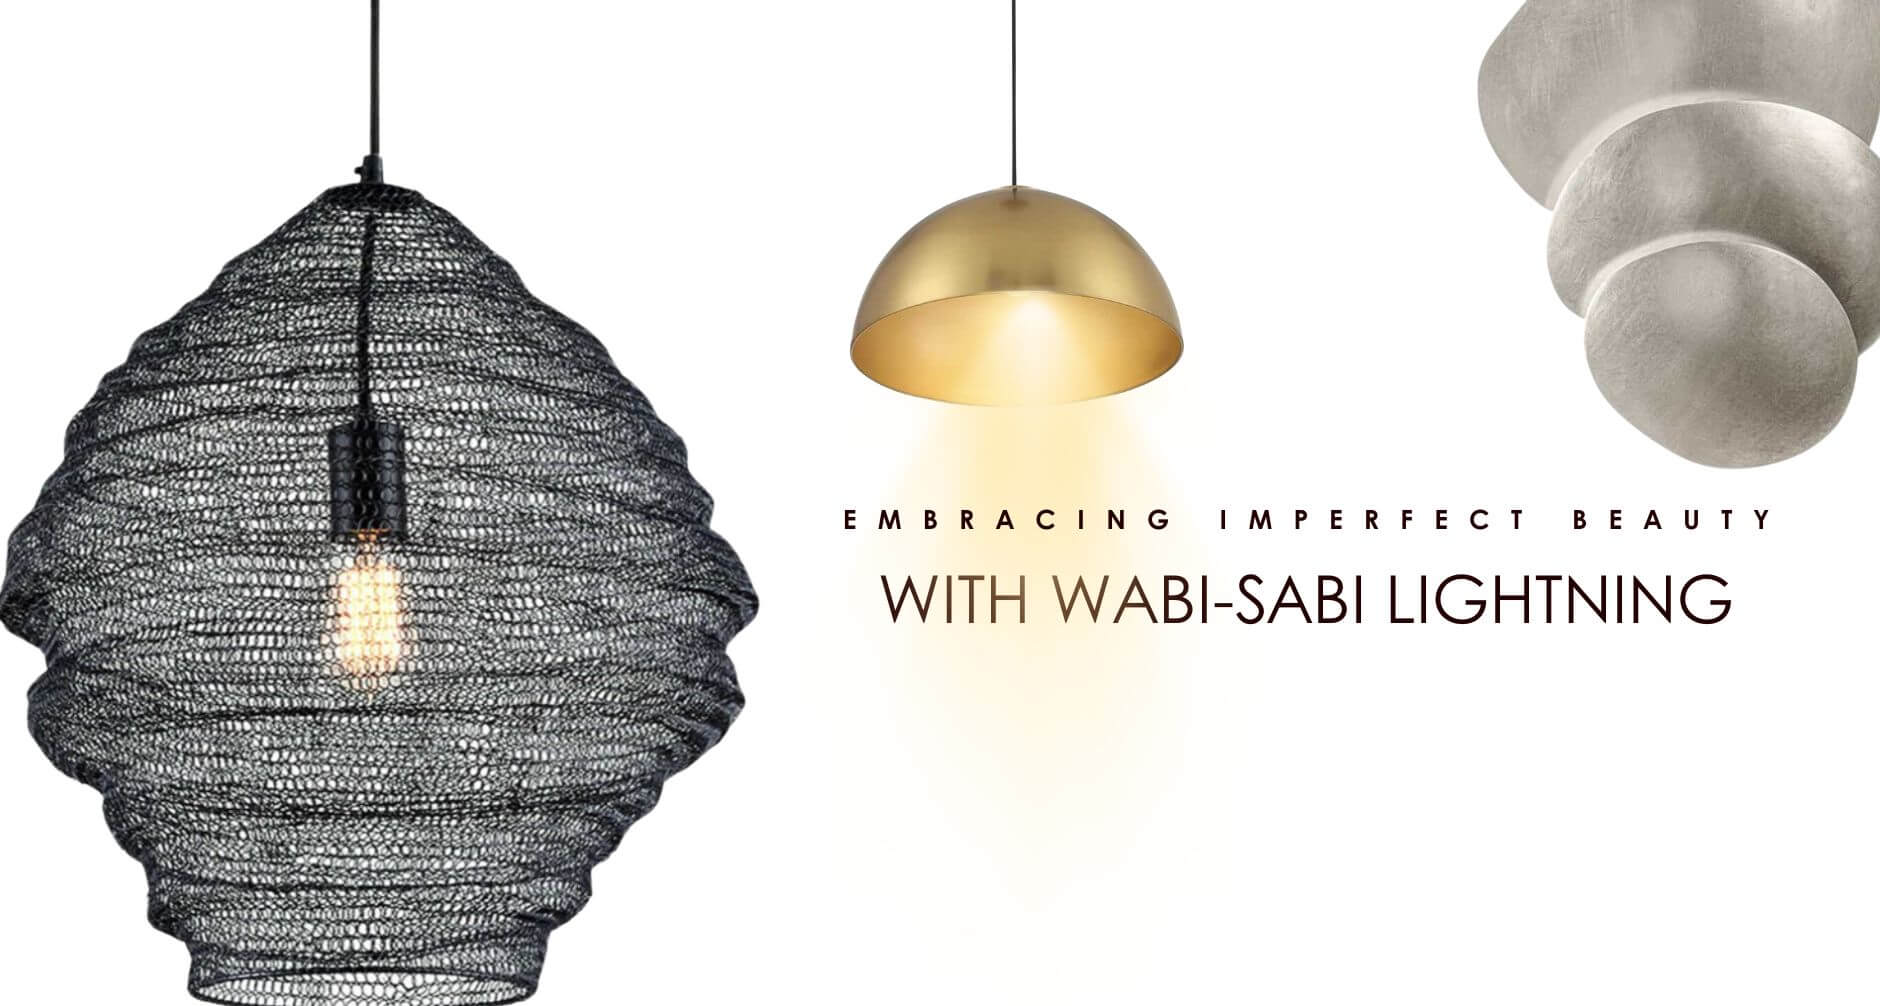 Discover the allure of Wabi-Sabi lightning at LuxeDecor—embrace imperfection and celebrate nature's untamed beauty in your space.